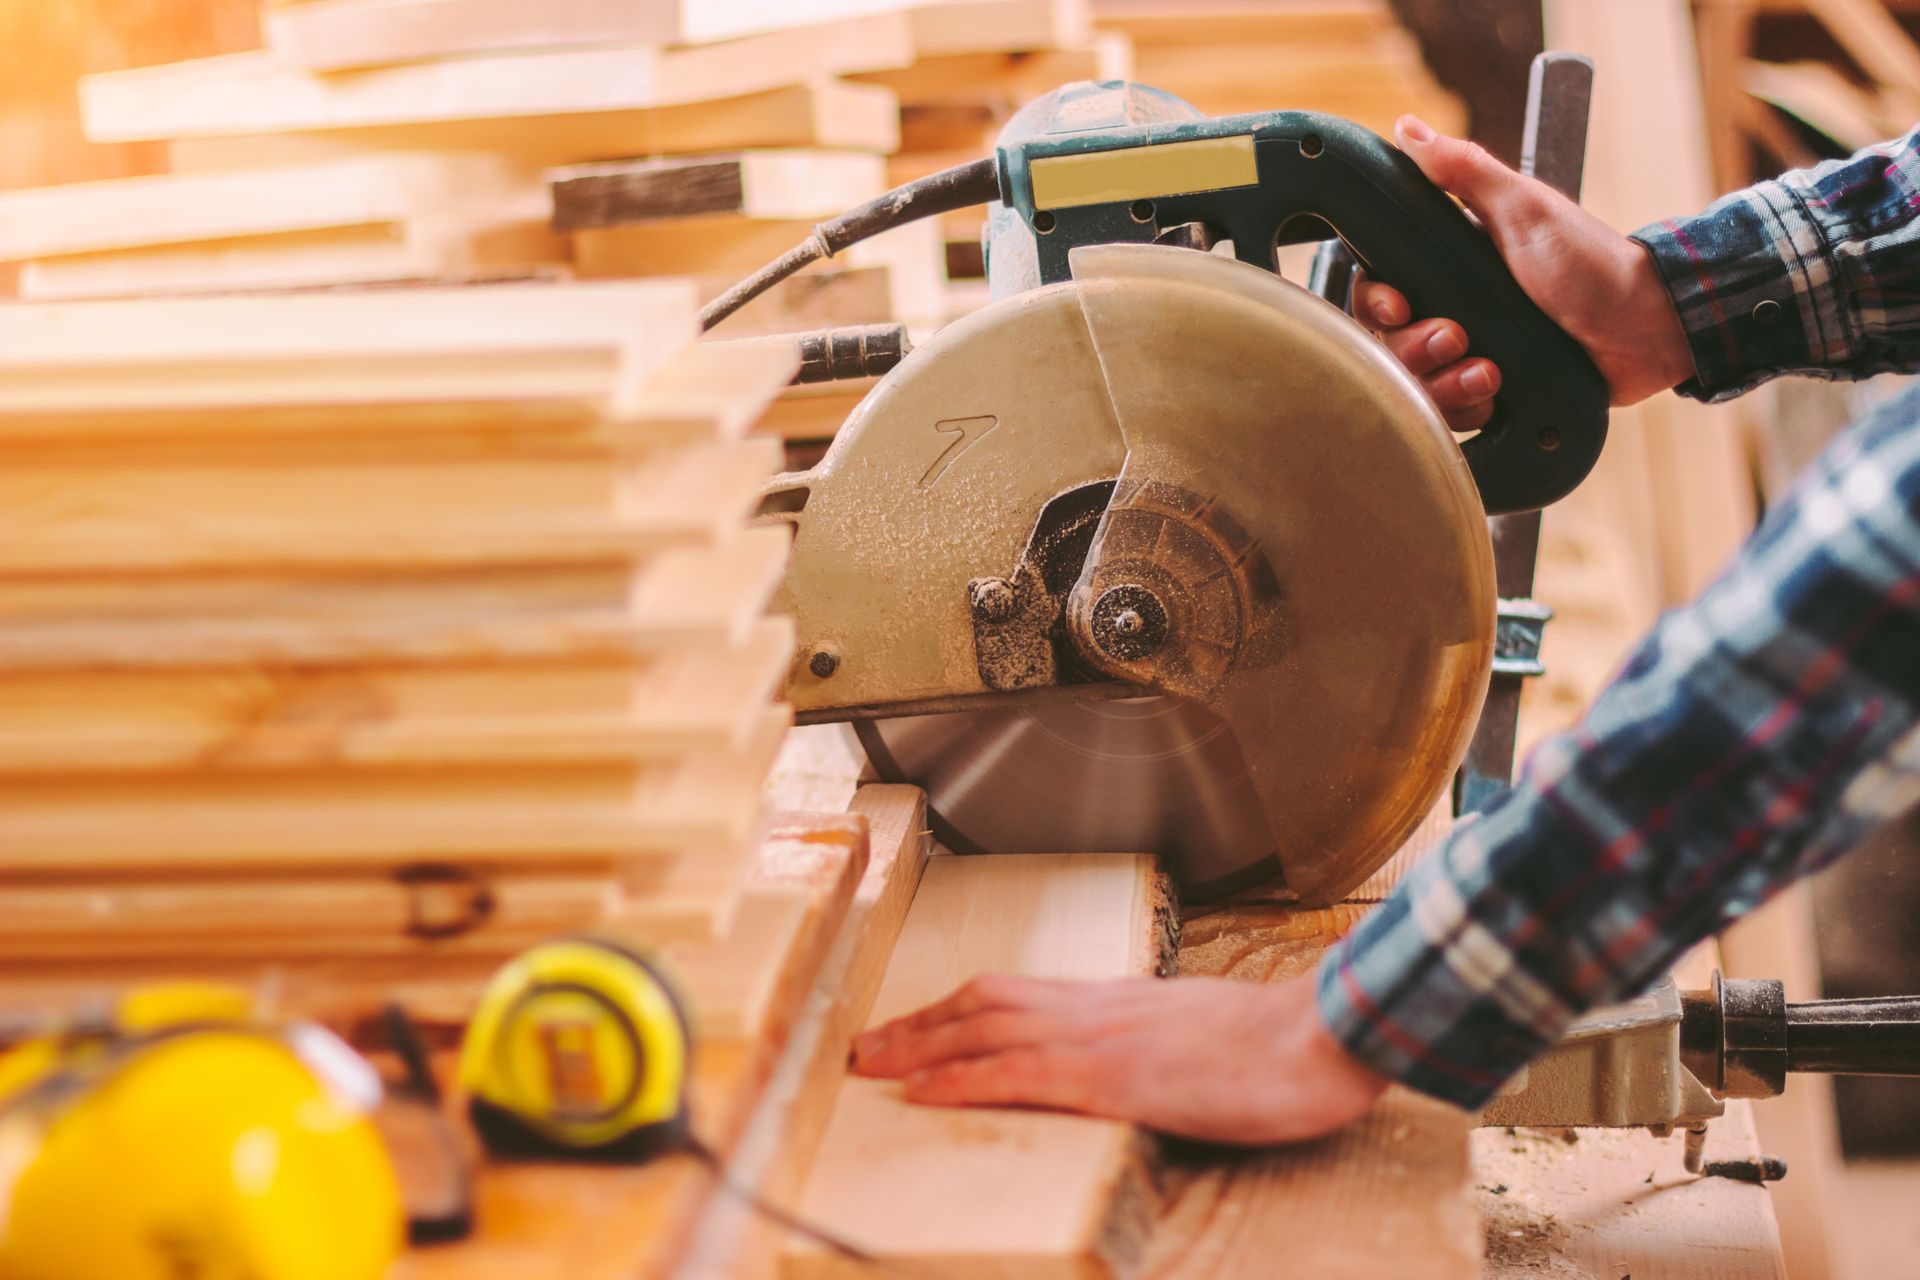 A man is using a circular saw to cut a piece of wood.